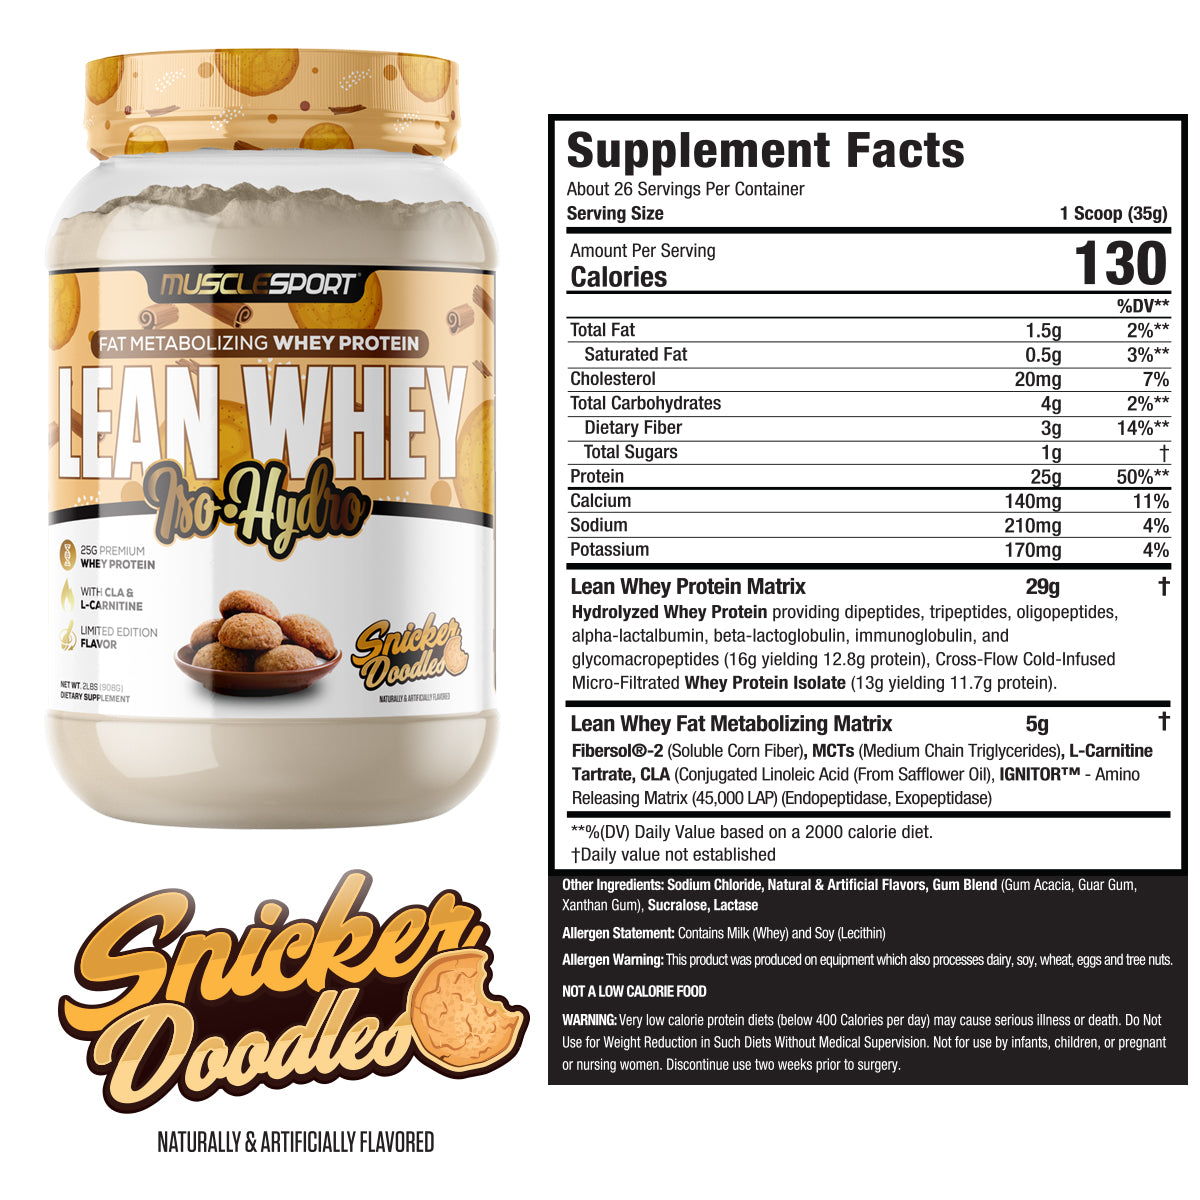 Snicker Doodles Lean Whey Supplement Facts